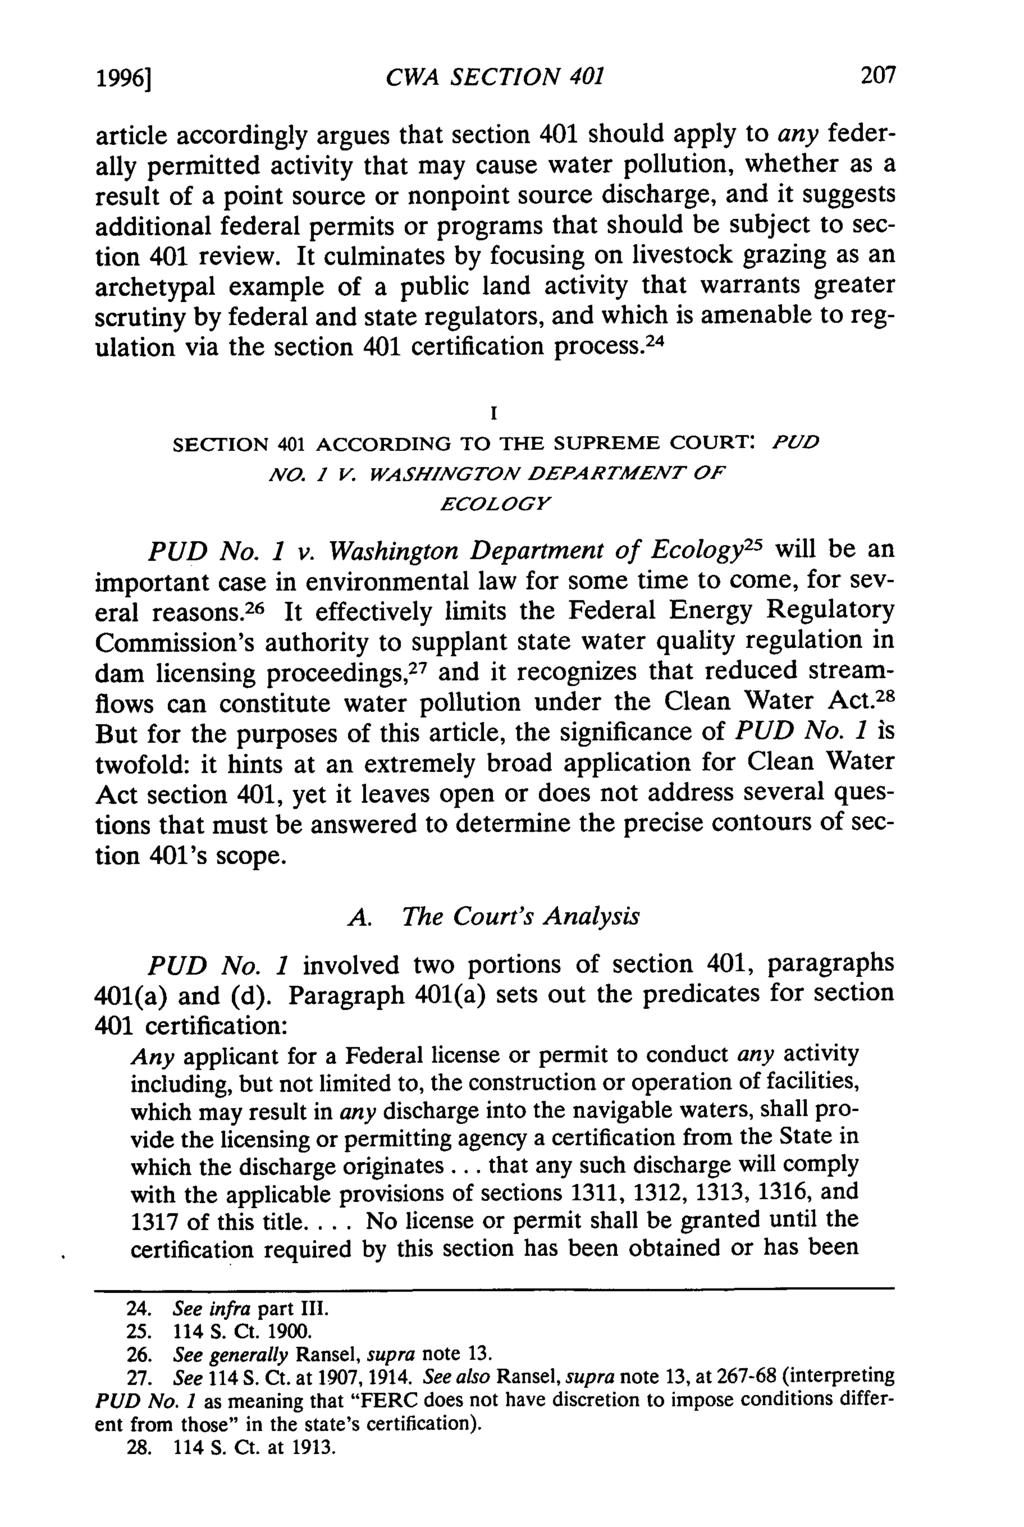 1996] CWA SECTION 401 article accordingly argues that section 401 should apply to any federally permitted activity that may cause water pollution, whether as a result of a point source or nonpoint